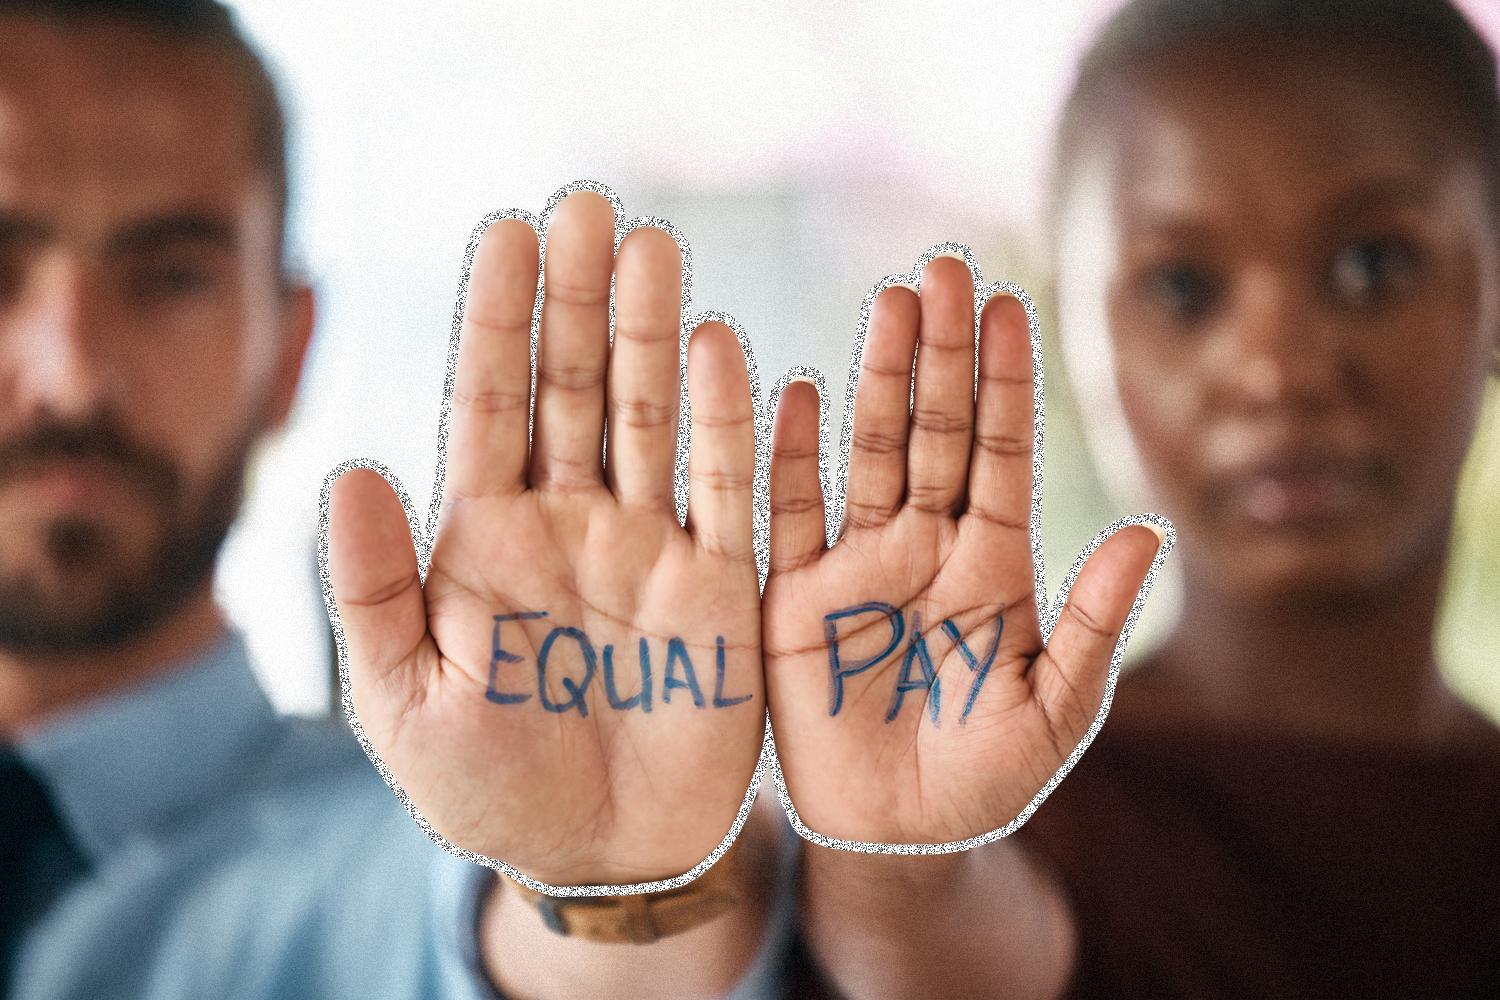 A man and a woman each holding a hand with "equal" and "pay" written on their palms.